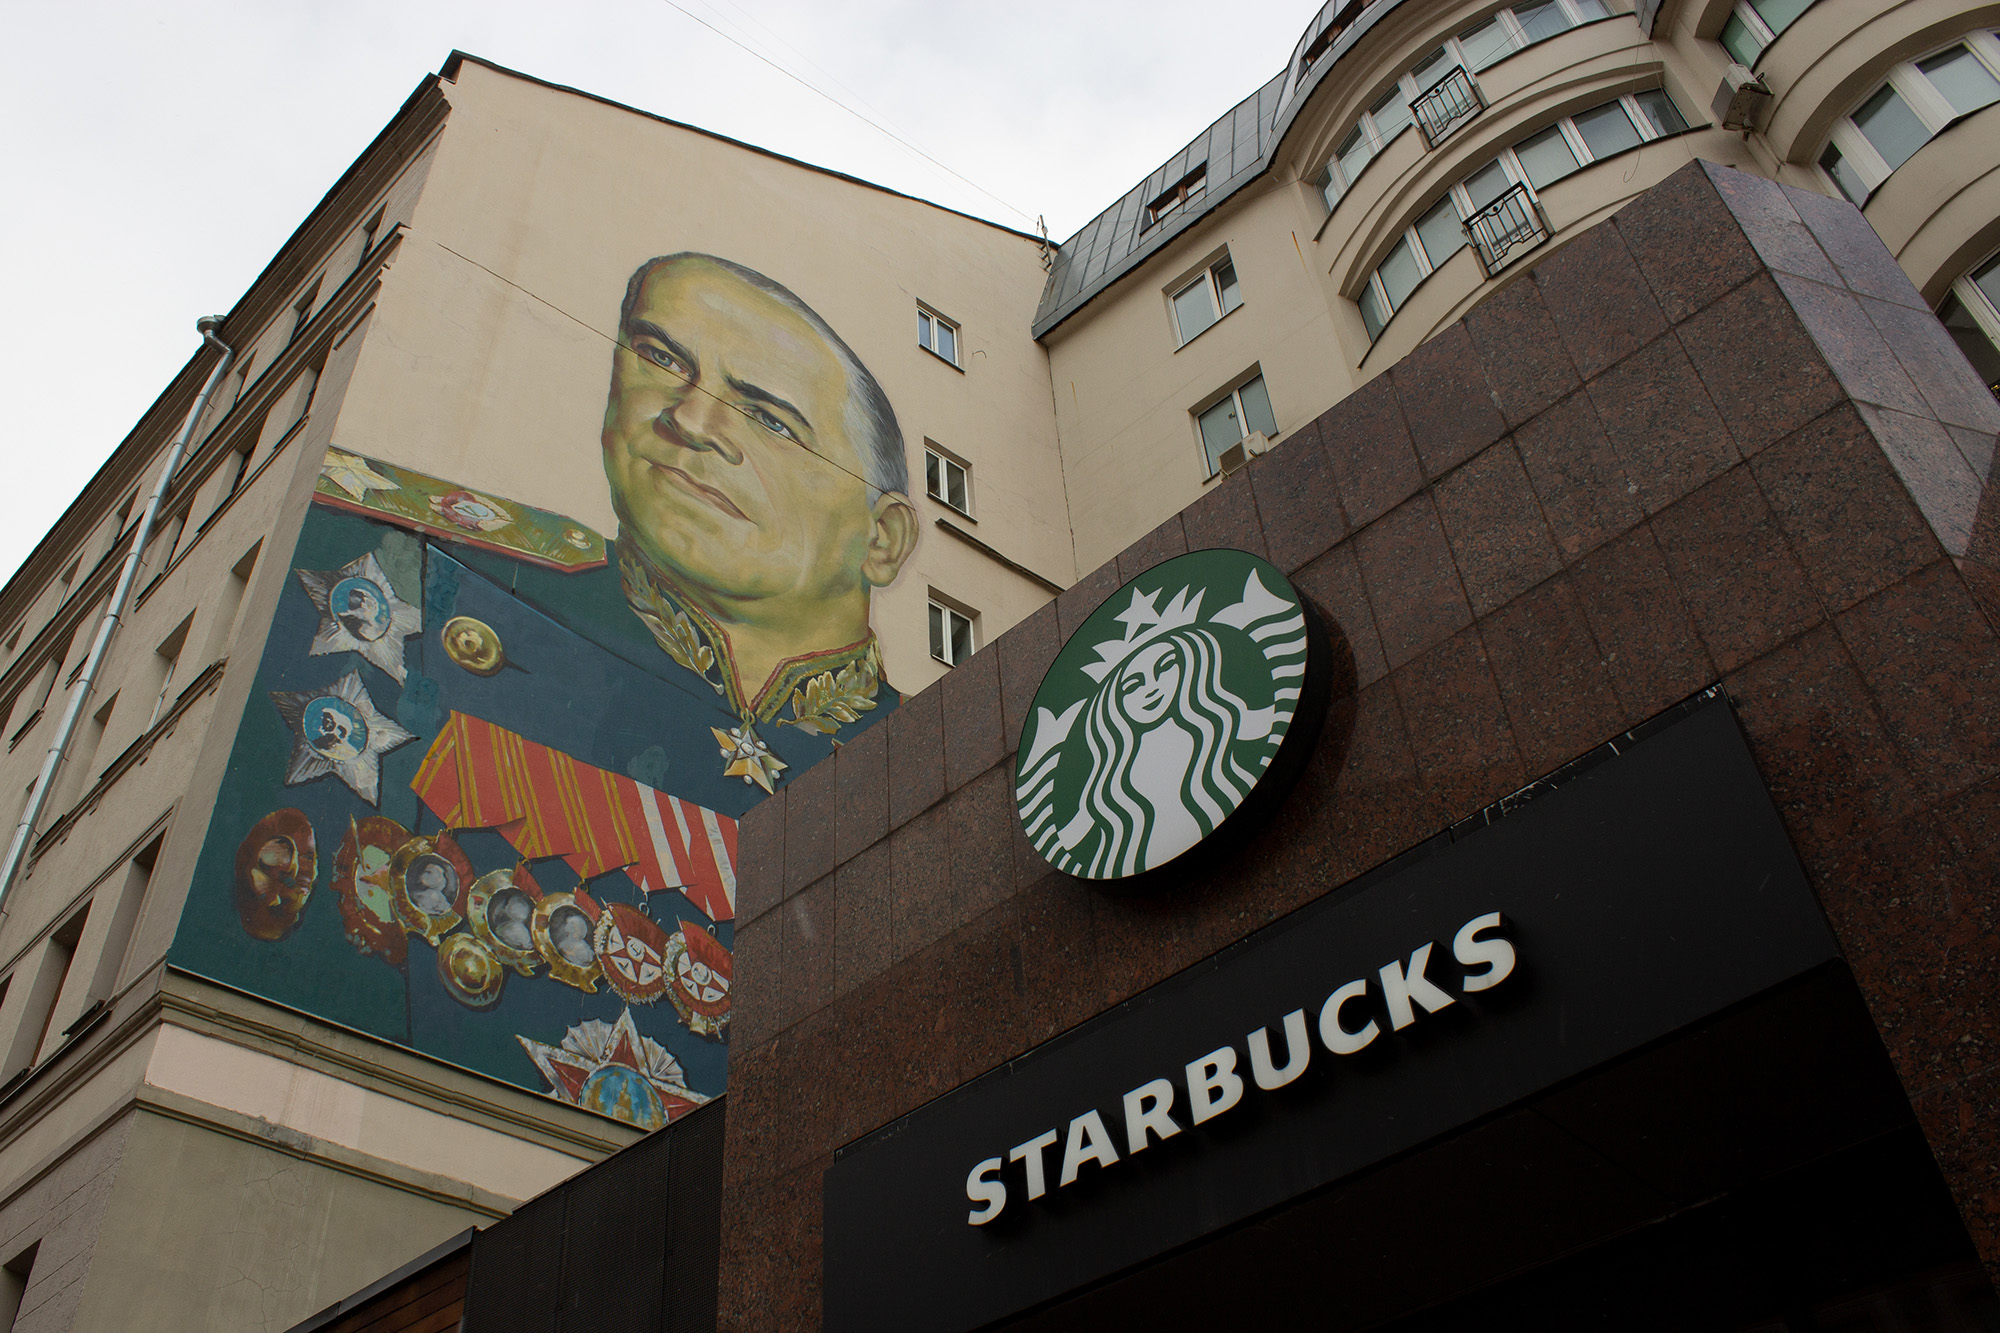 A Starbucks coffee shop alongside a mural of Georgy Zhukov, a Soviet general and Marshal of the Soviet Union, in Moscow, Russia, on March 27.